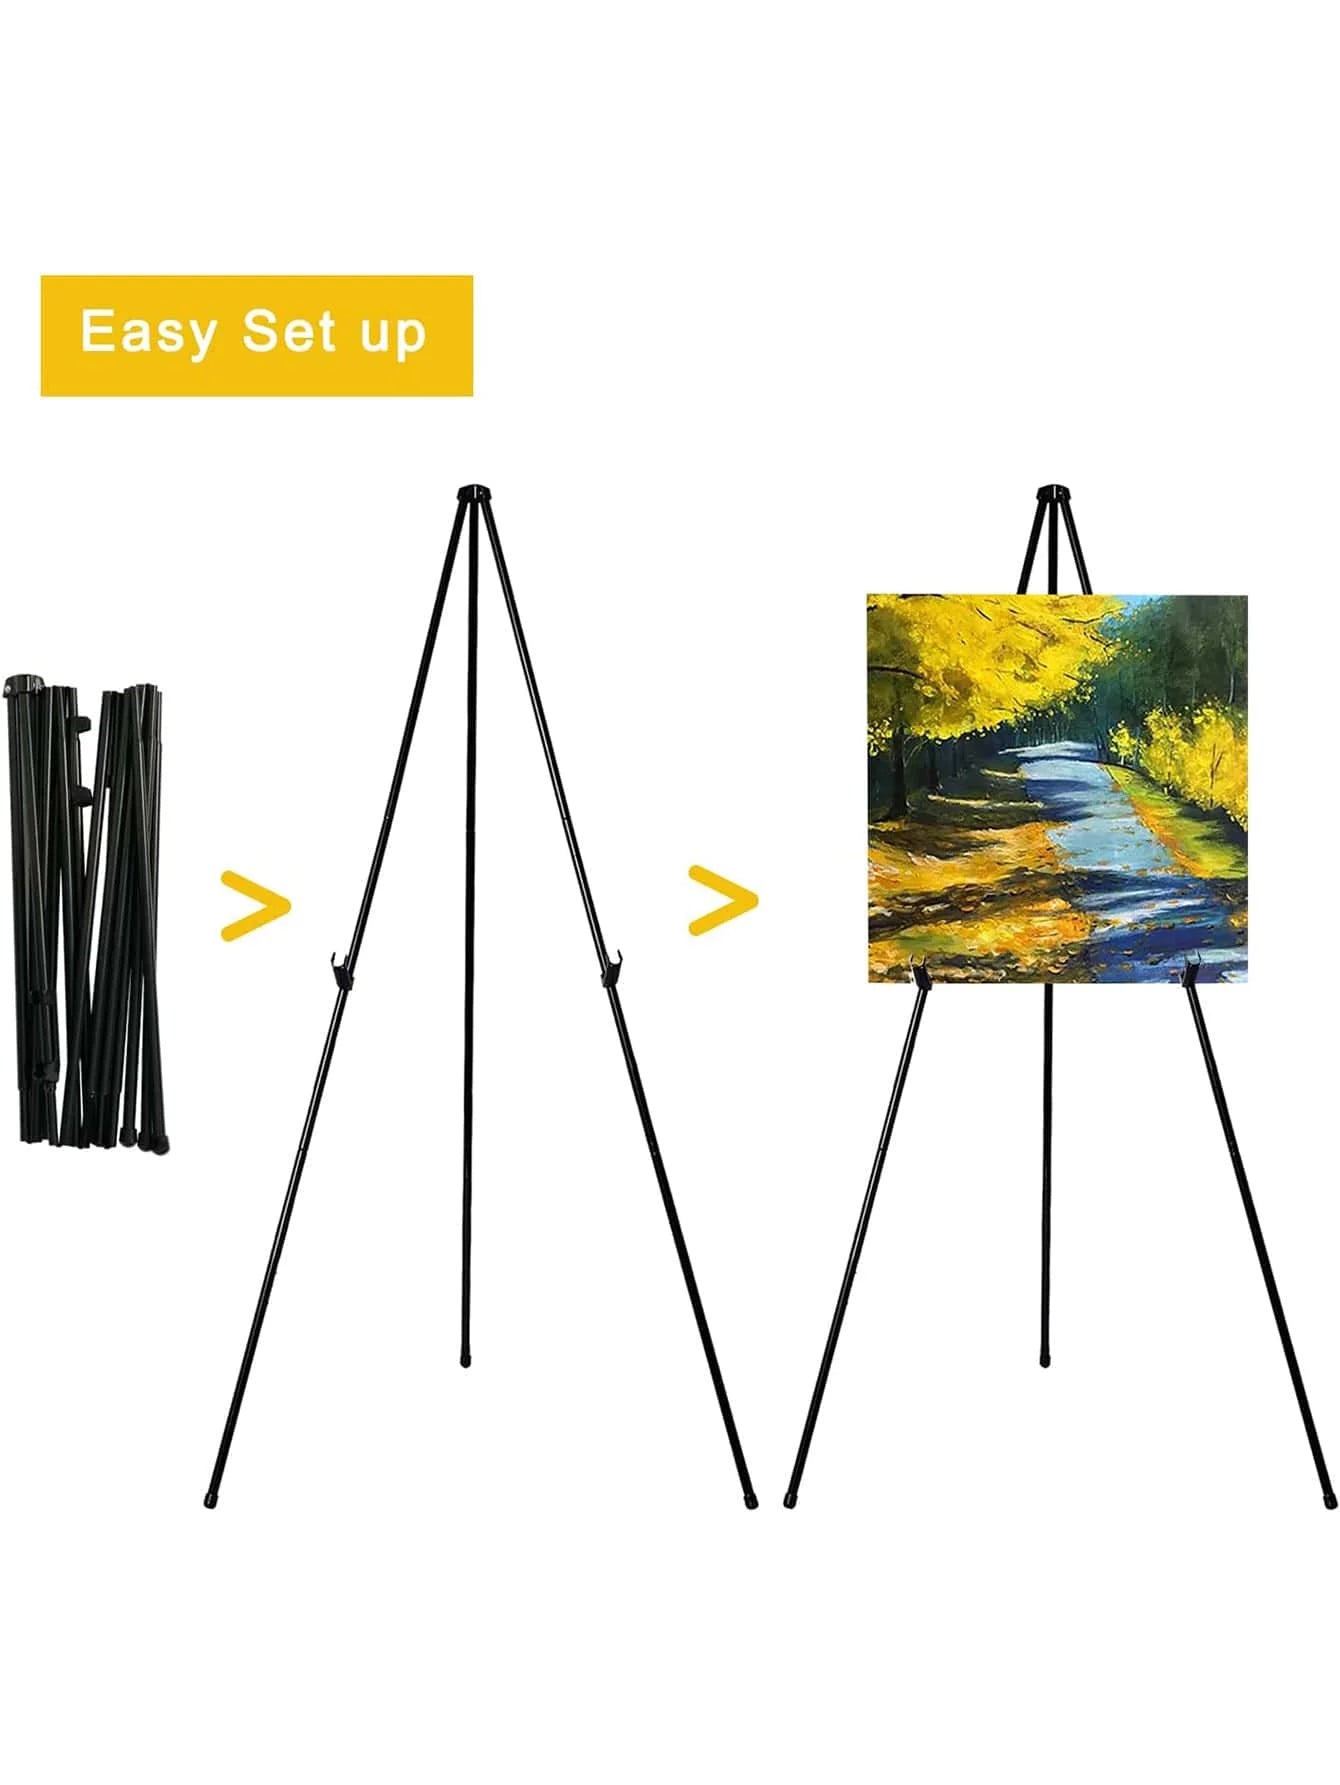 High Steel Easy Folding Display Easel | Quick Set-Up & Portable | Adjustable Height | Perfect for Presentations & Exhibitions